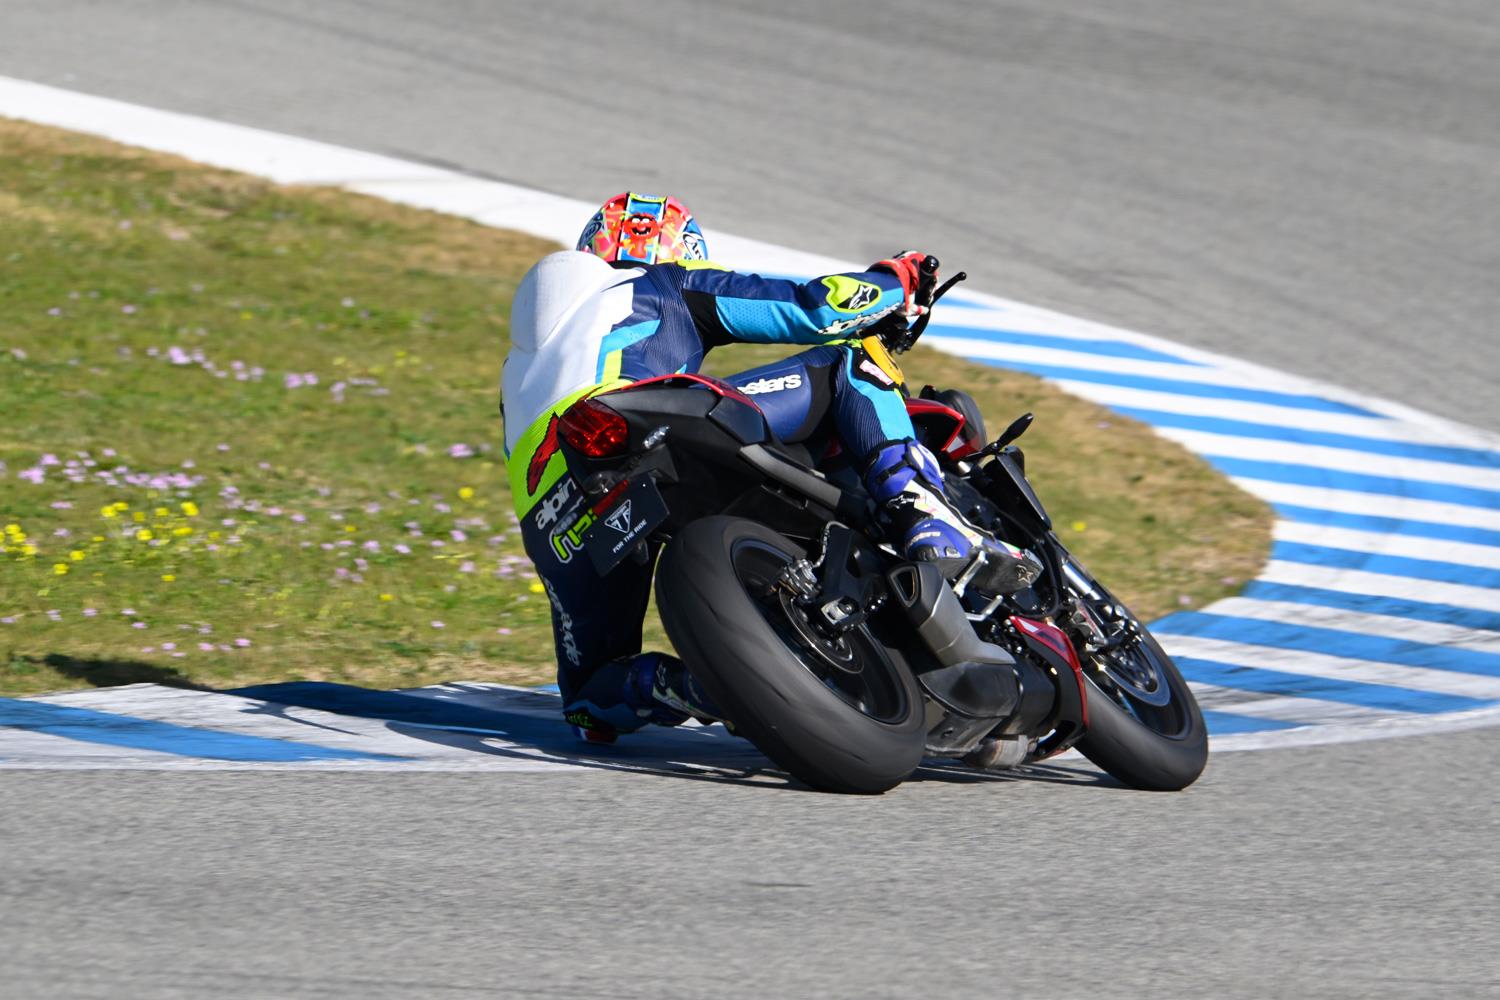 Neevesy riding the 2023 Triumph Street Triple 765 RS with knee down on the track